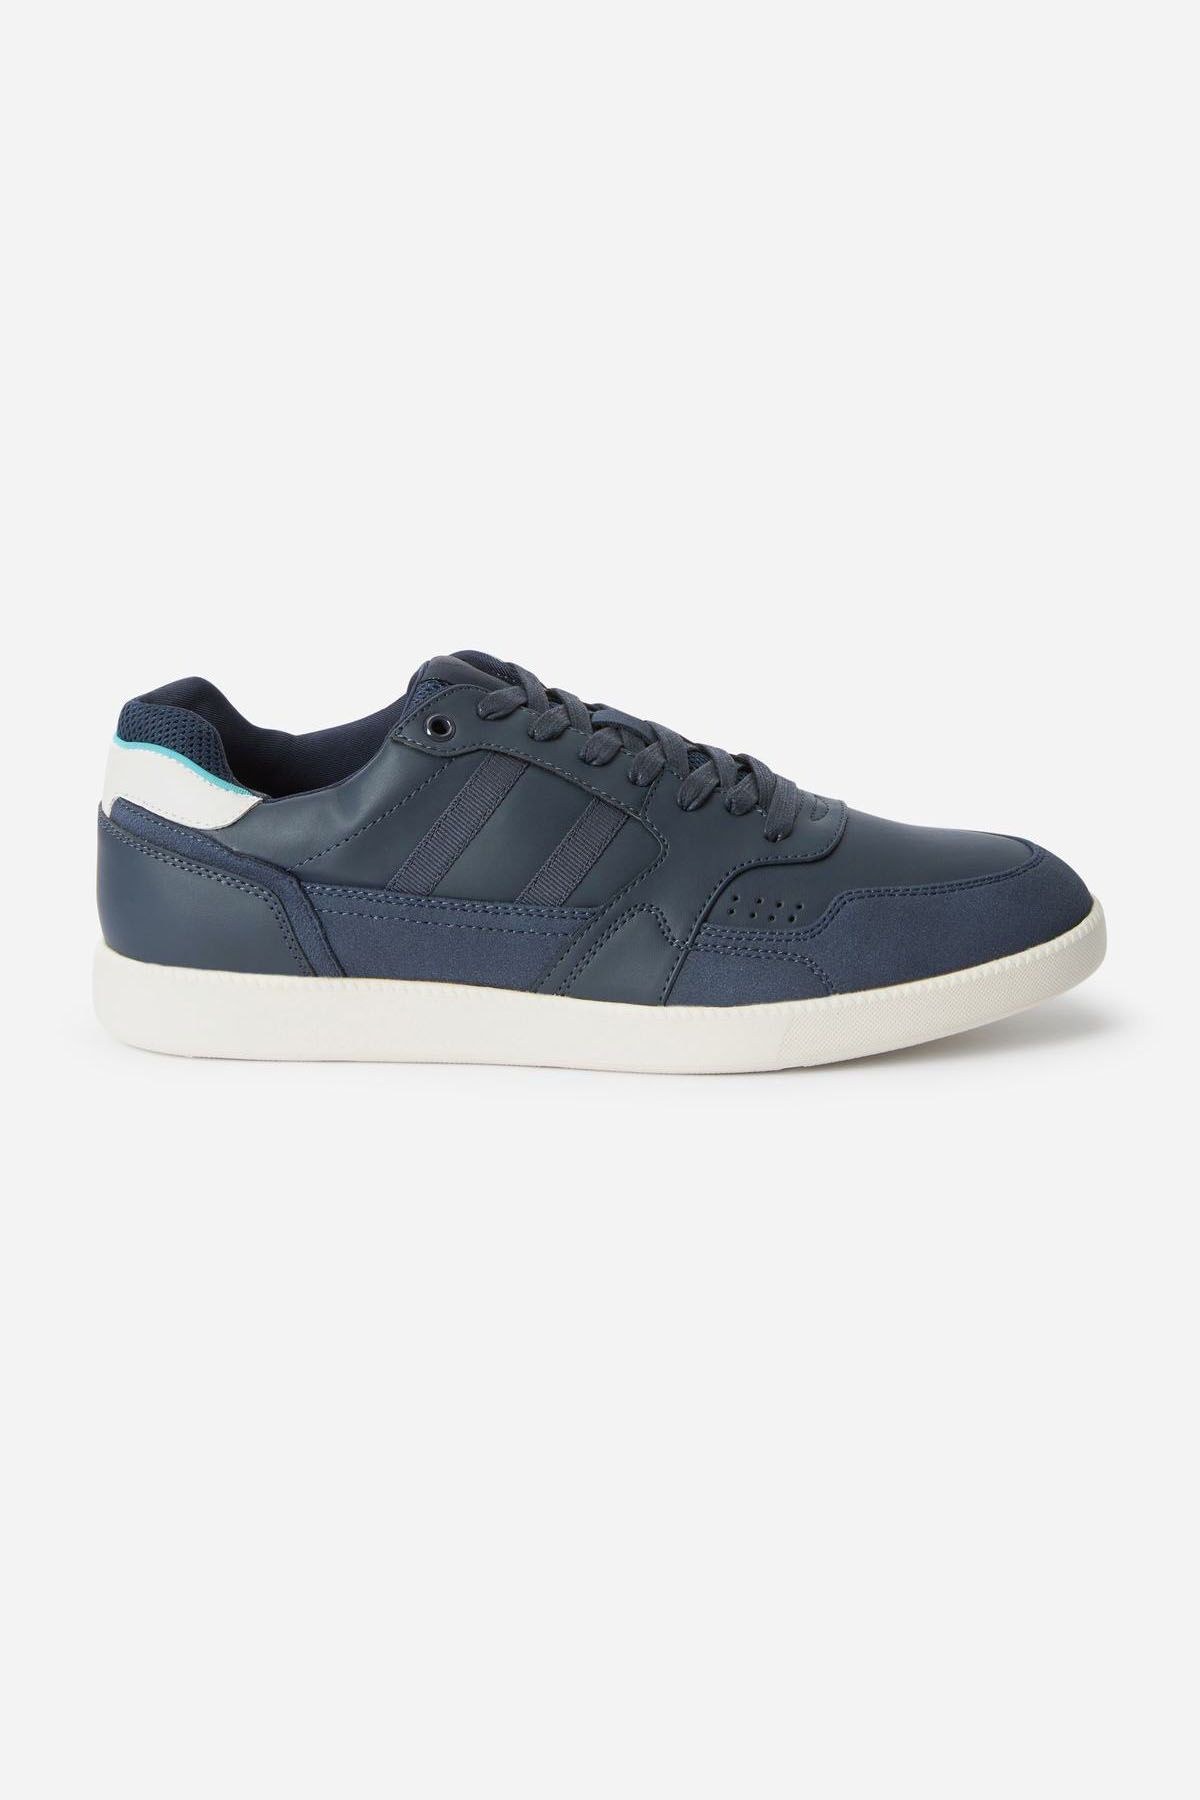 NEXT Trainers Blue Men Sneakers